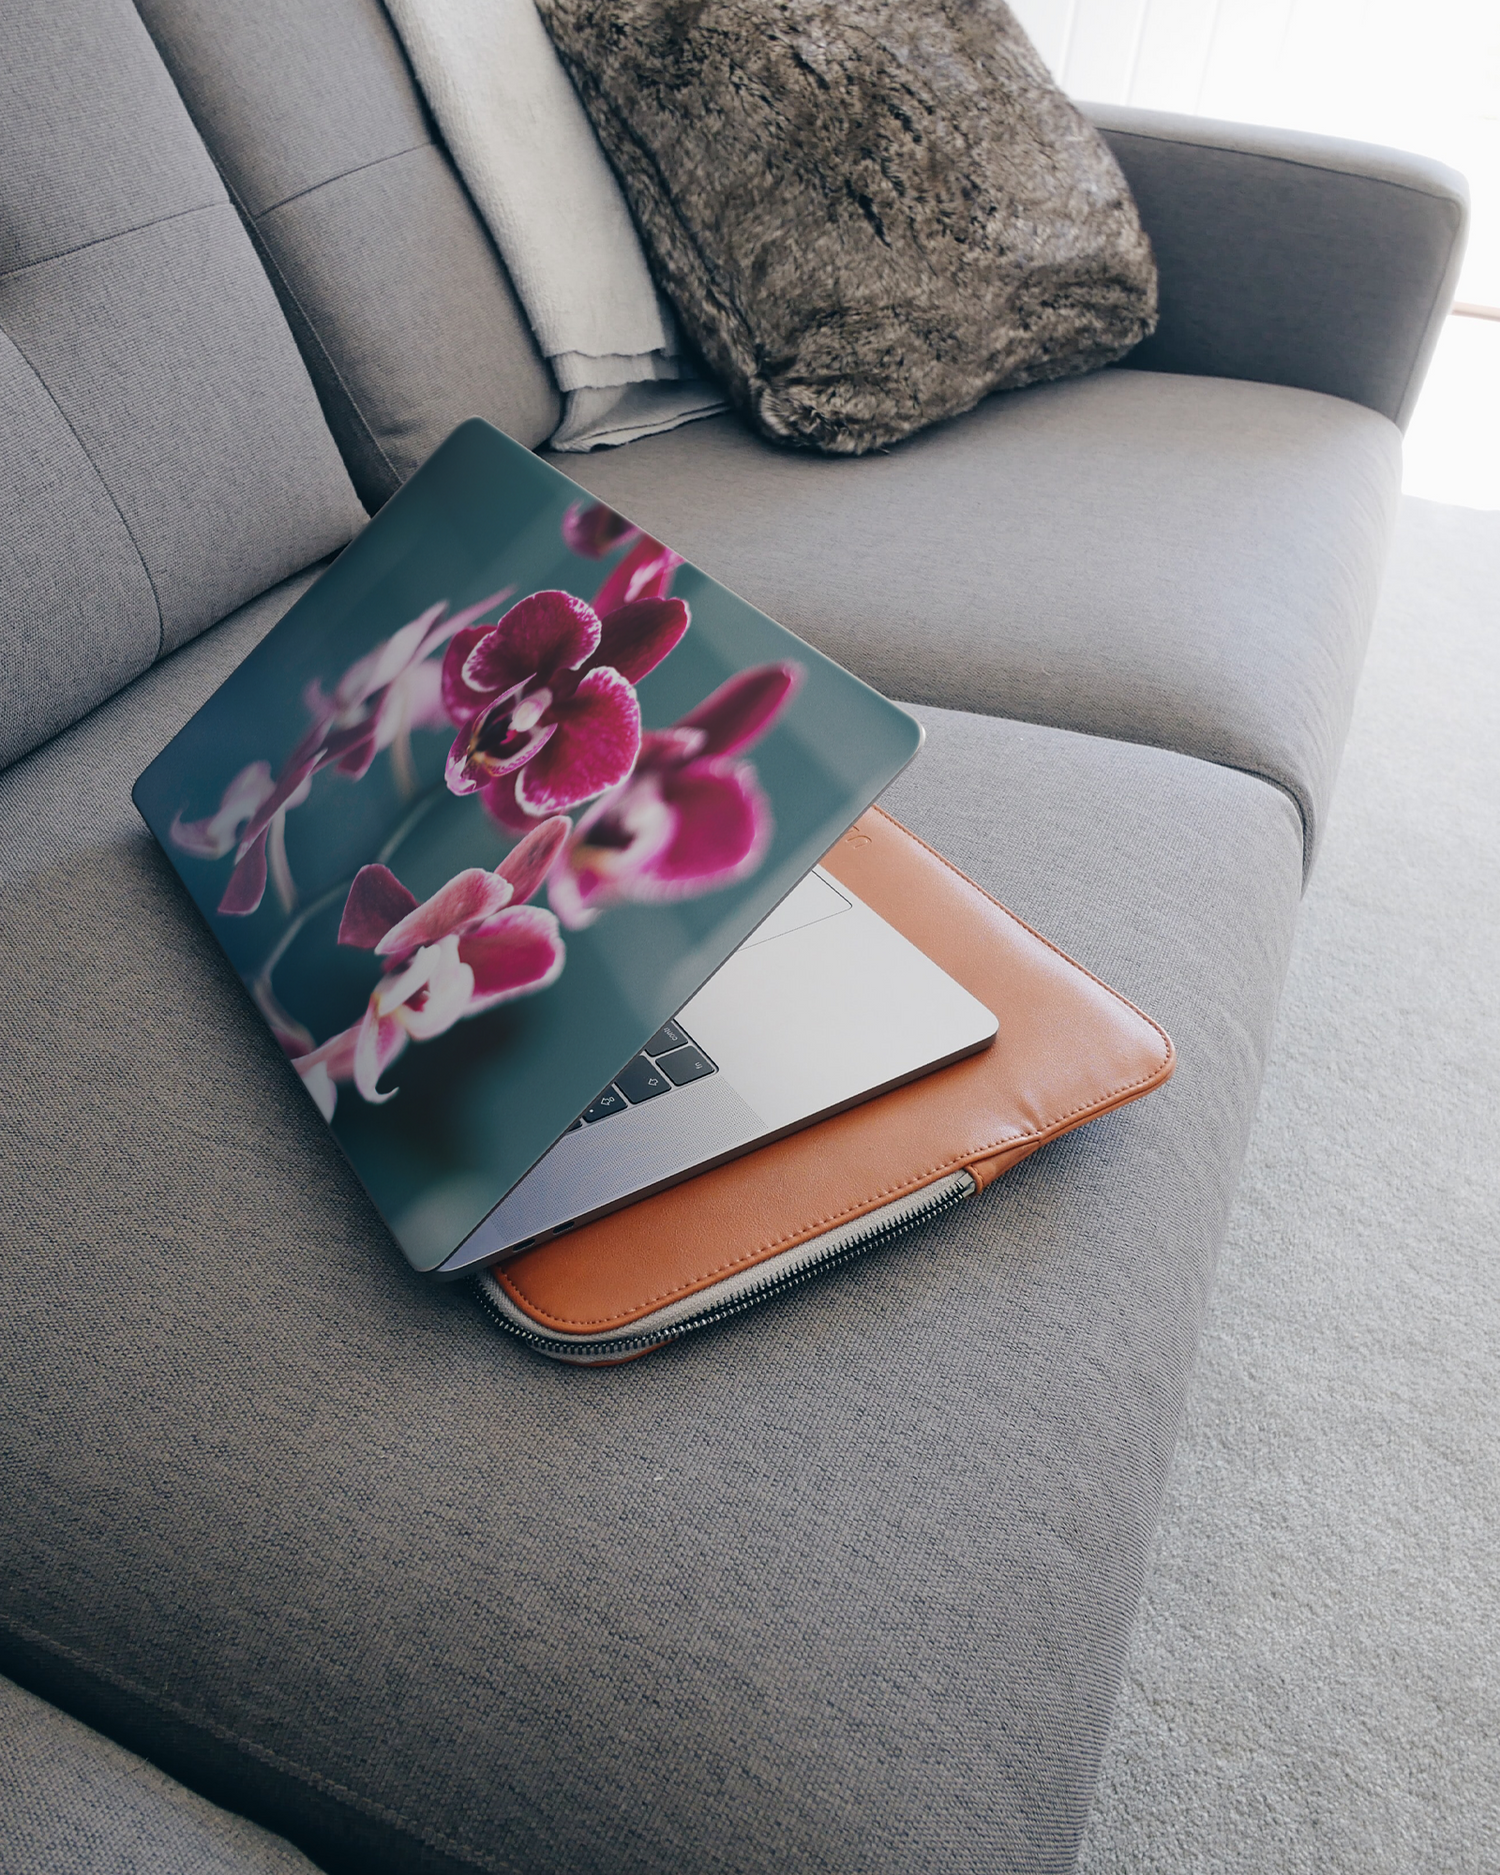 Orchid Laptop Skin for 15 inch Apple MacBooks on a couch